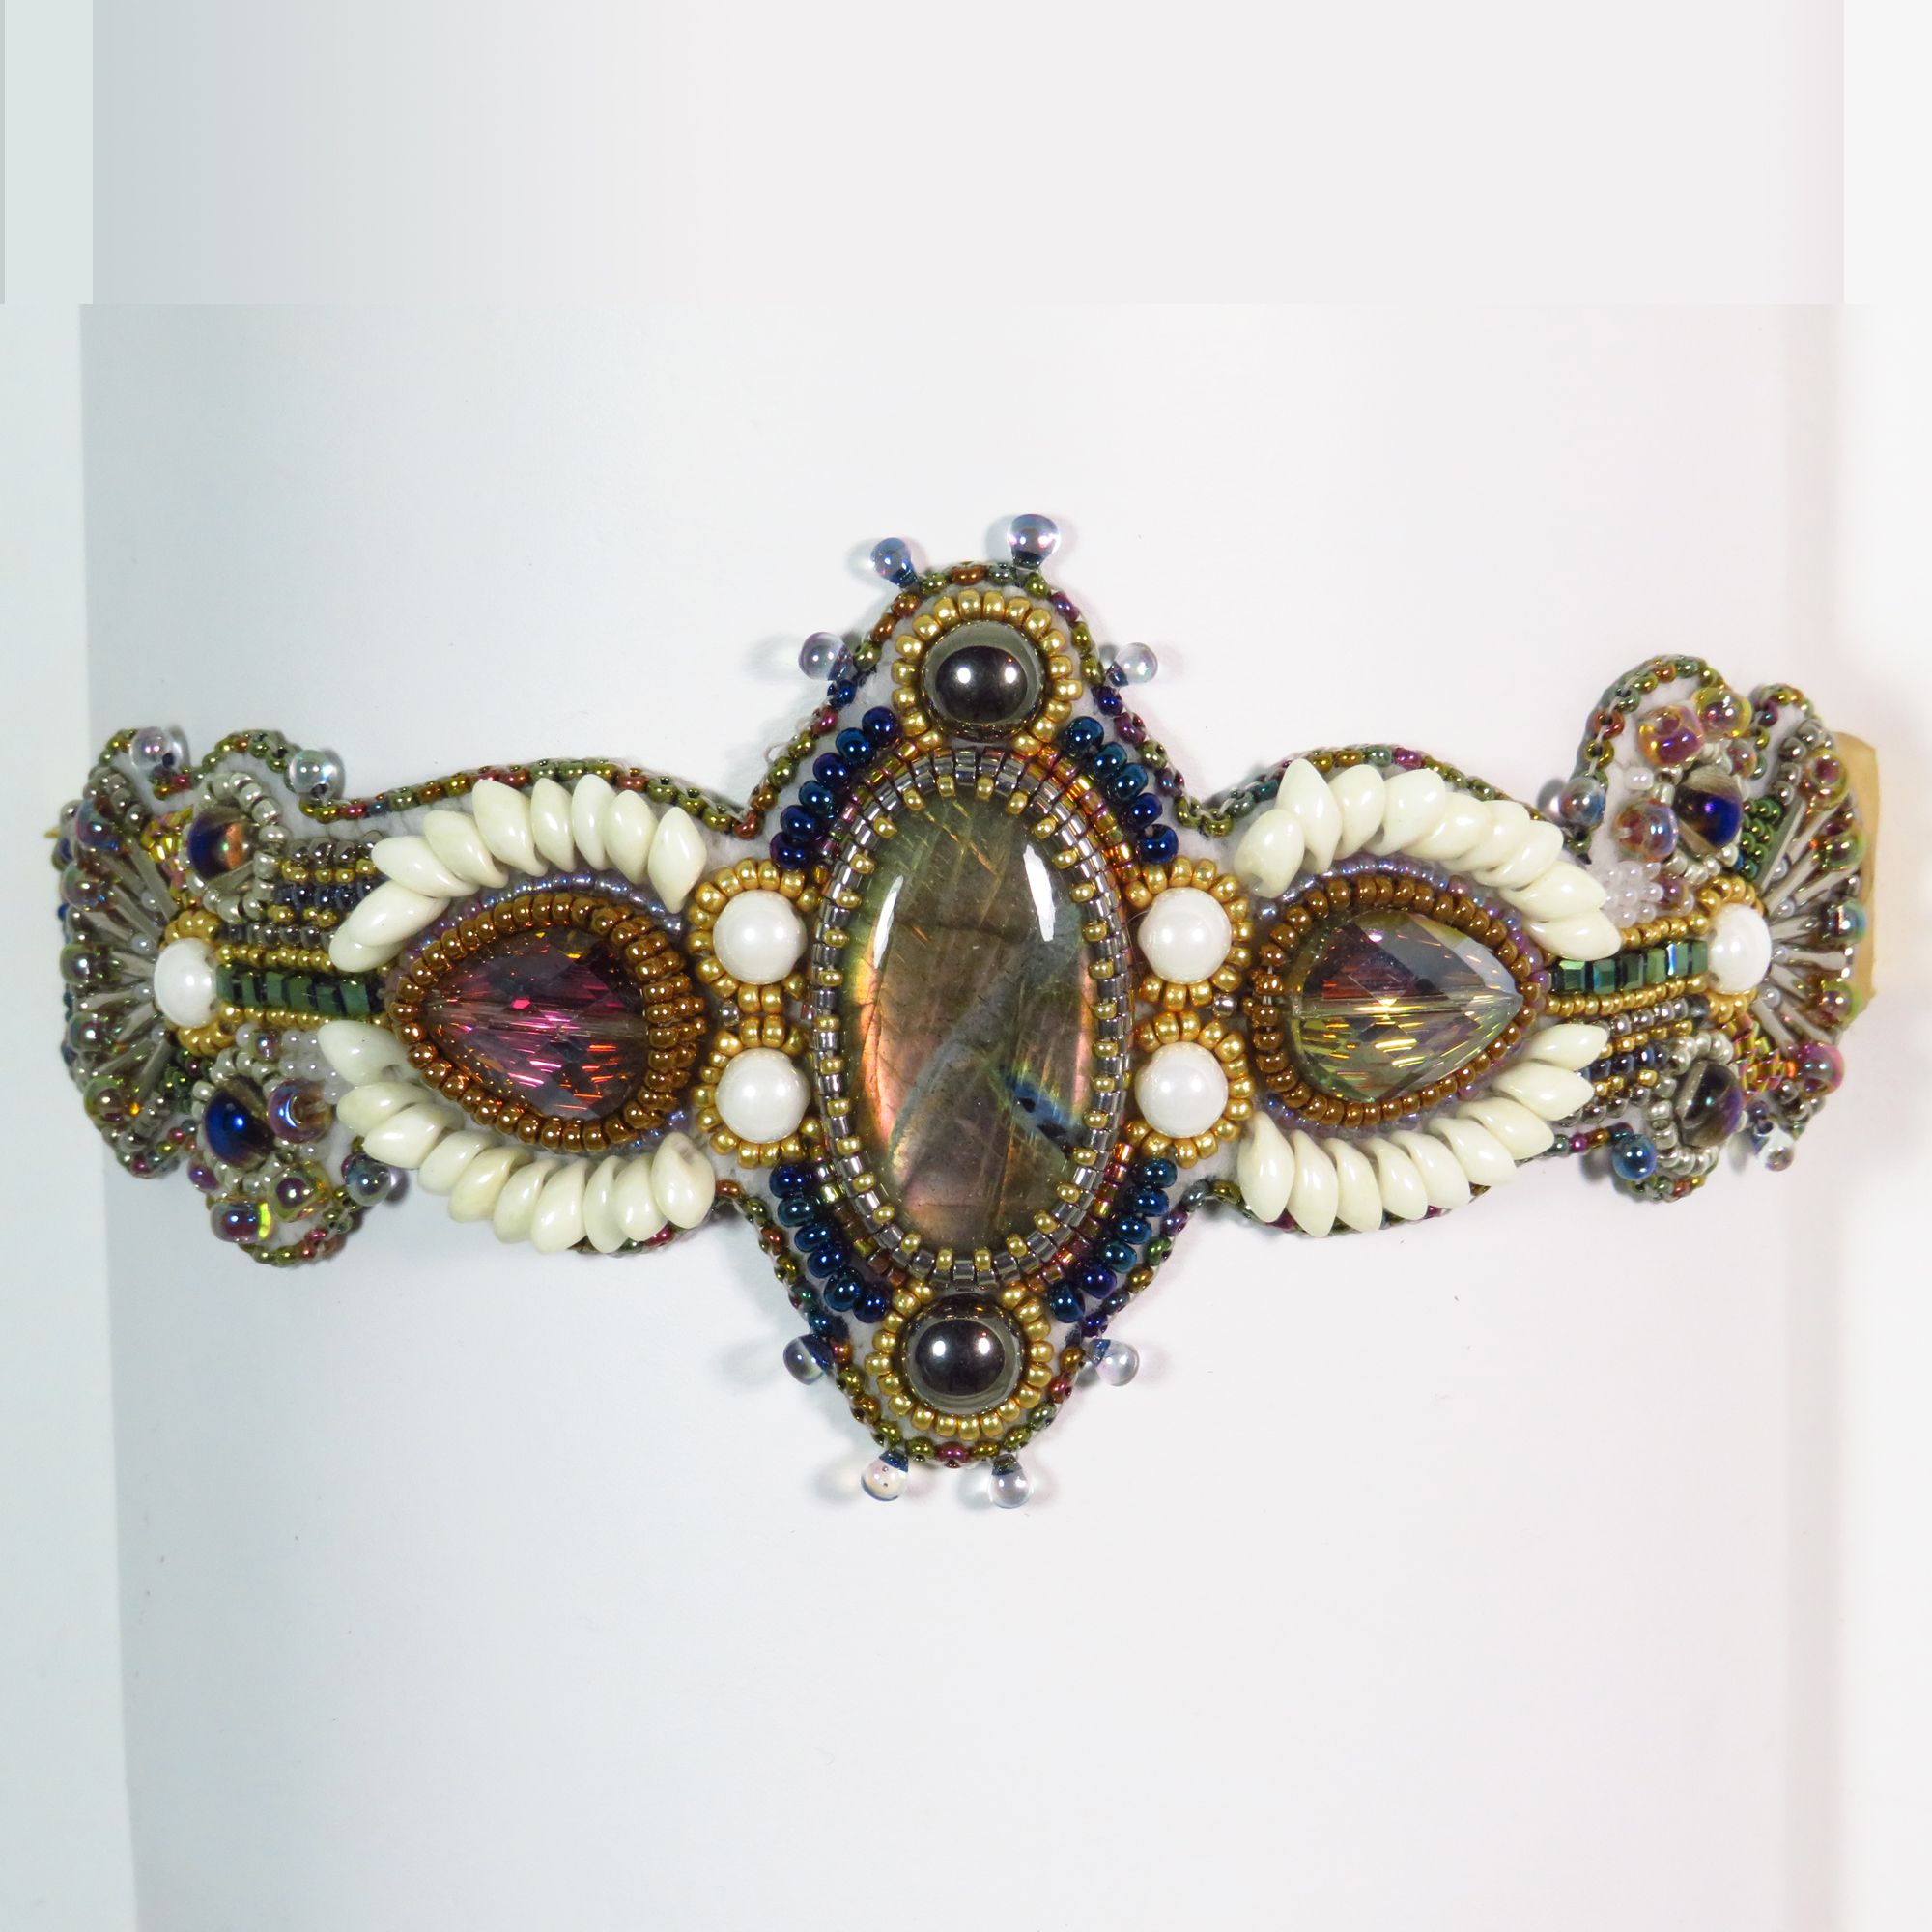 Labradorite feathered bead embroidered bracelet by Bonnie Van Hall